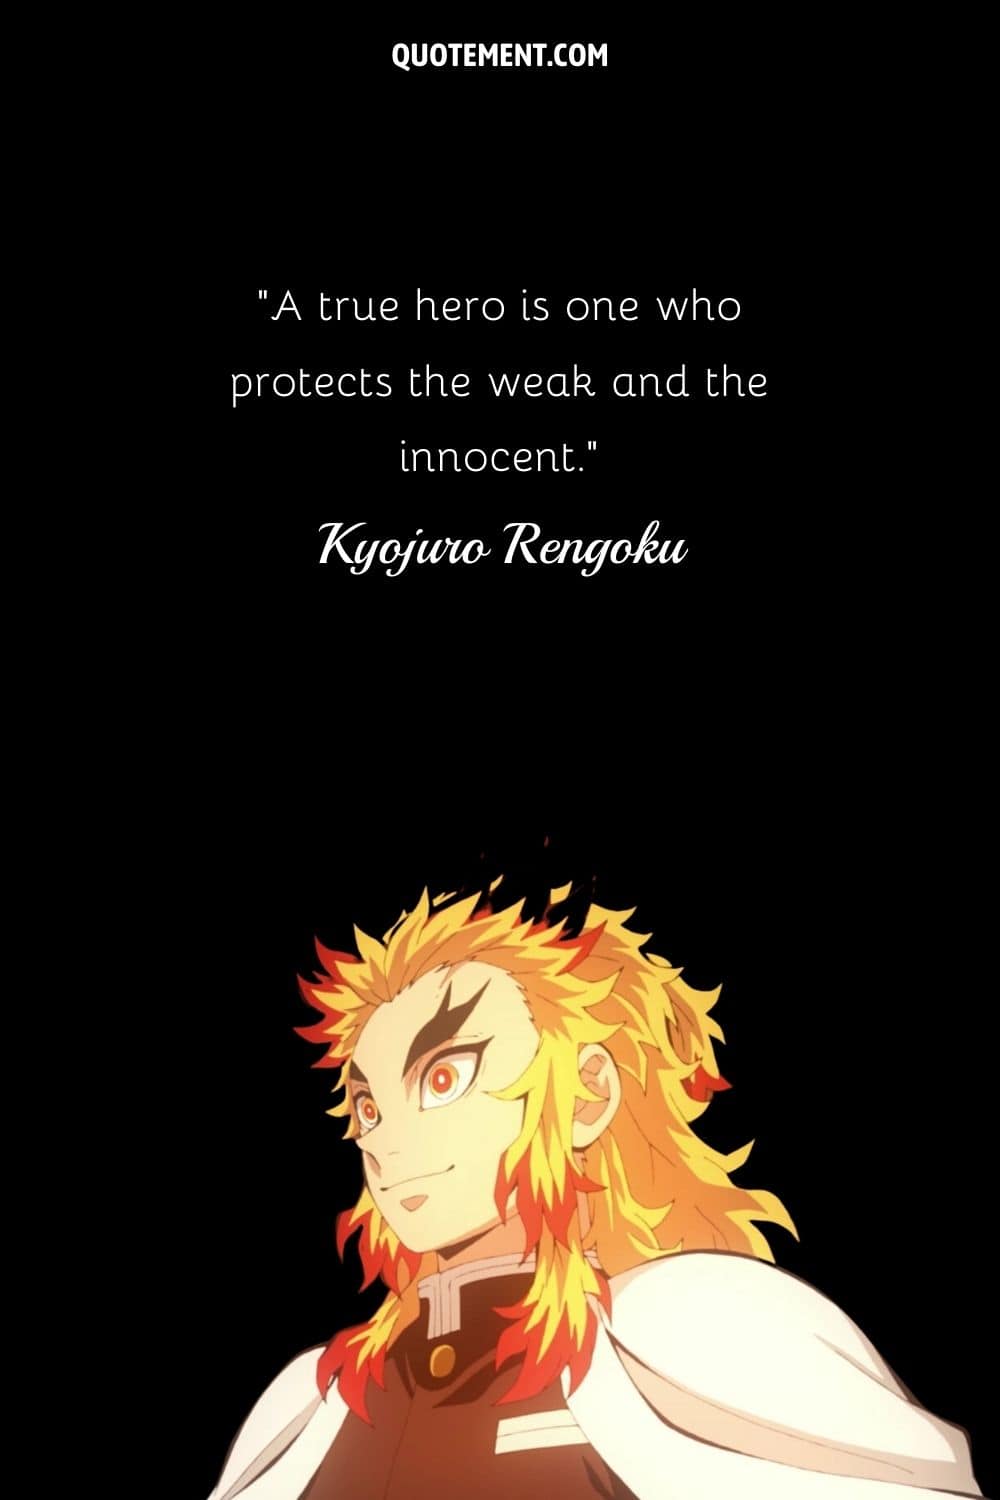 A true hero is one who protects the weak and the innocent